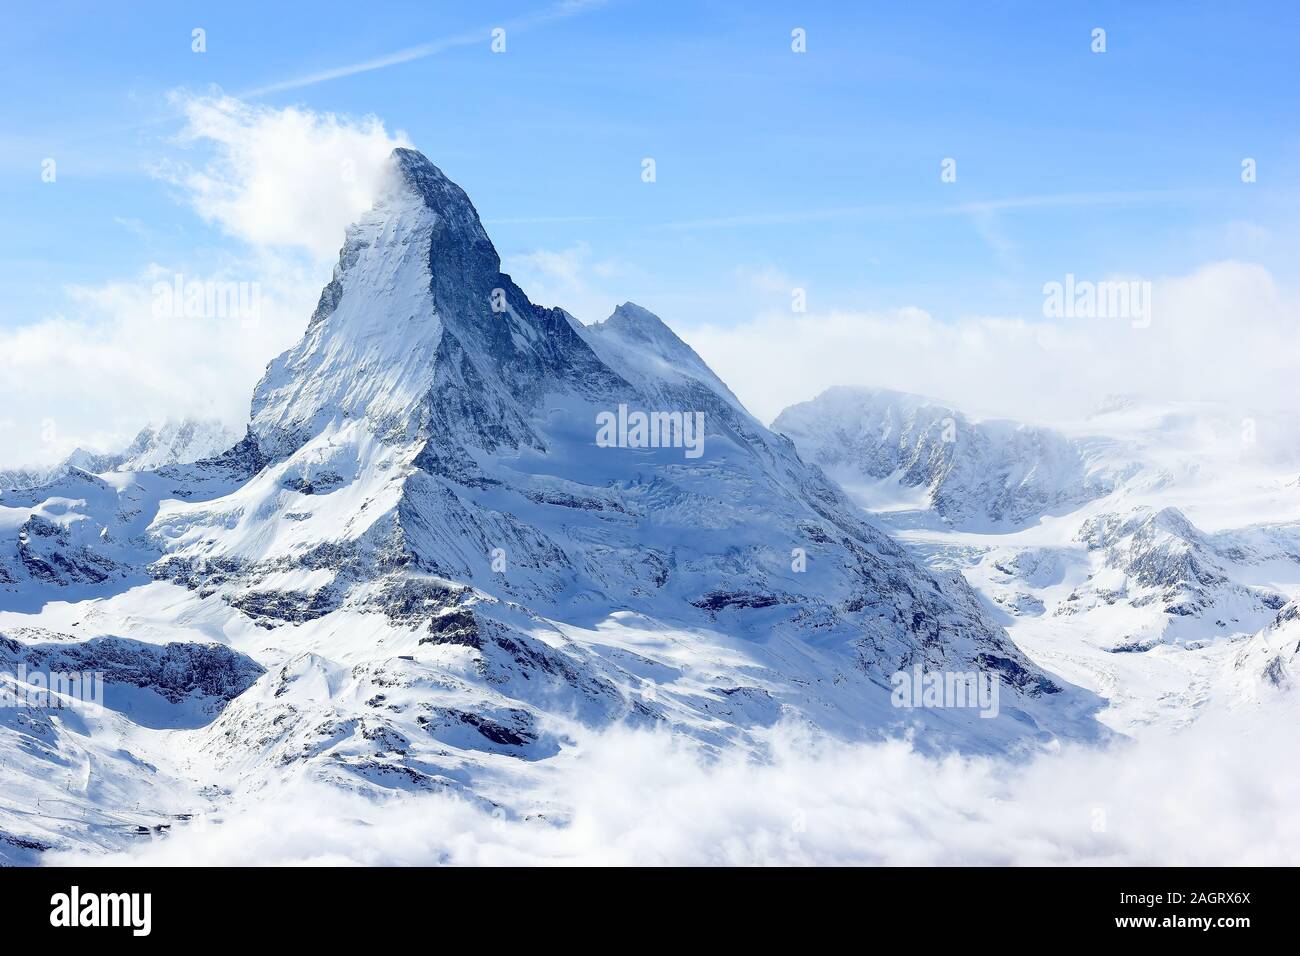 View of the Matterhorn from the Rothorn summit station. Swiss Alps, Valais, Switzerland. Stock Photo